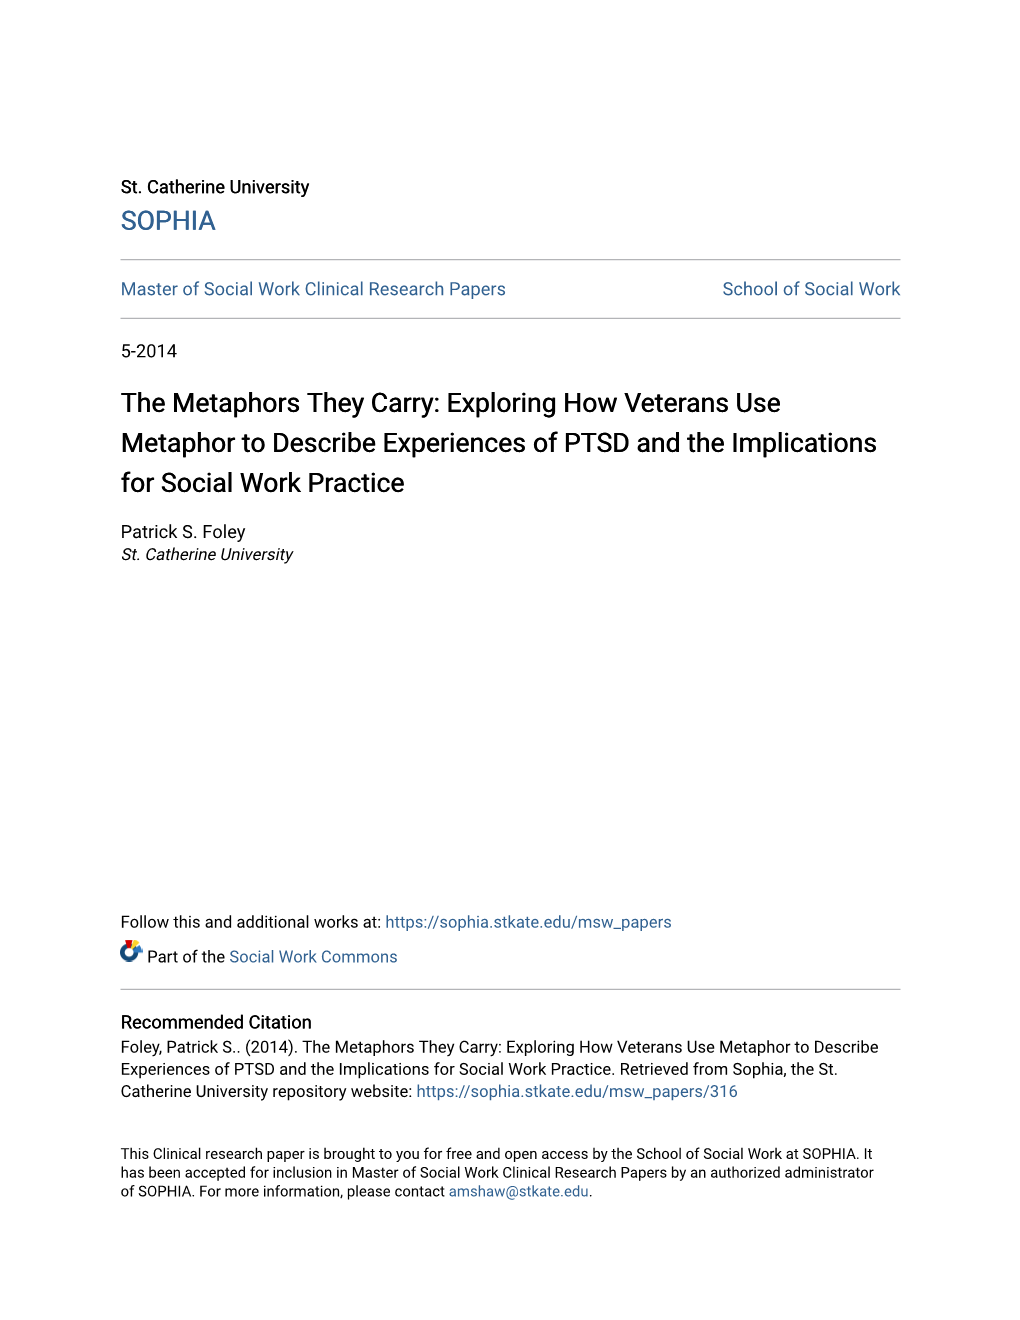 Exploring How Veterans Use Metaphor to Describe Experiences of PTSD and the Implications for Social Work Practice